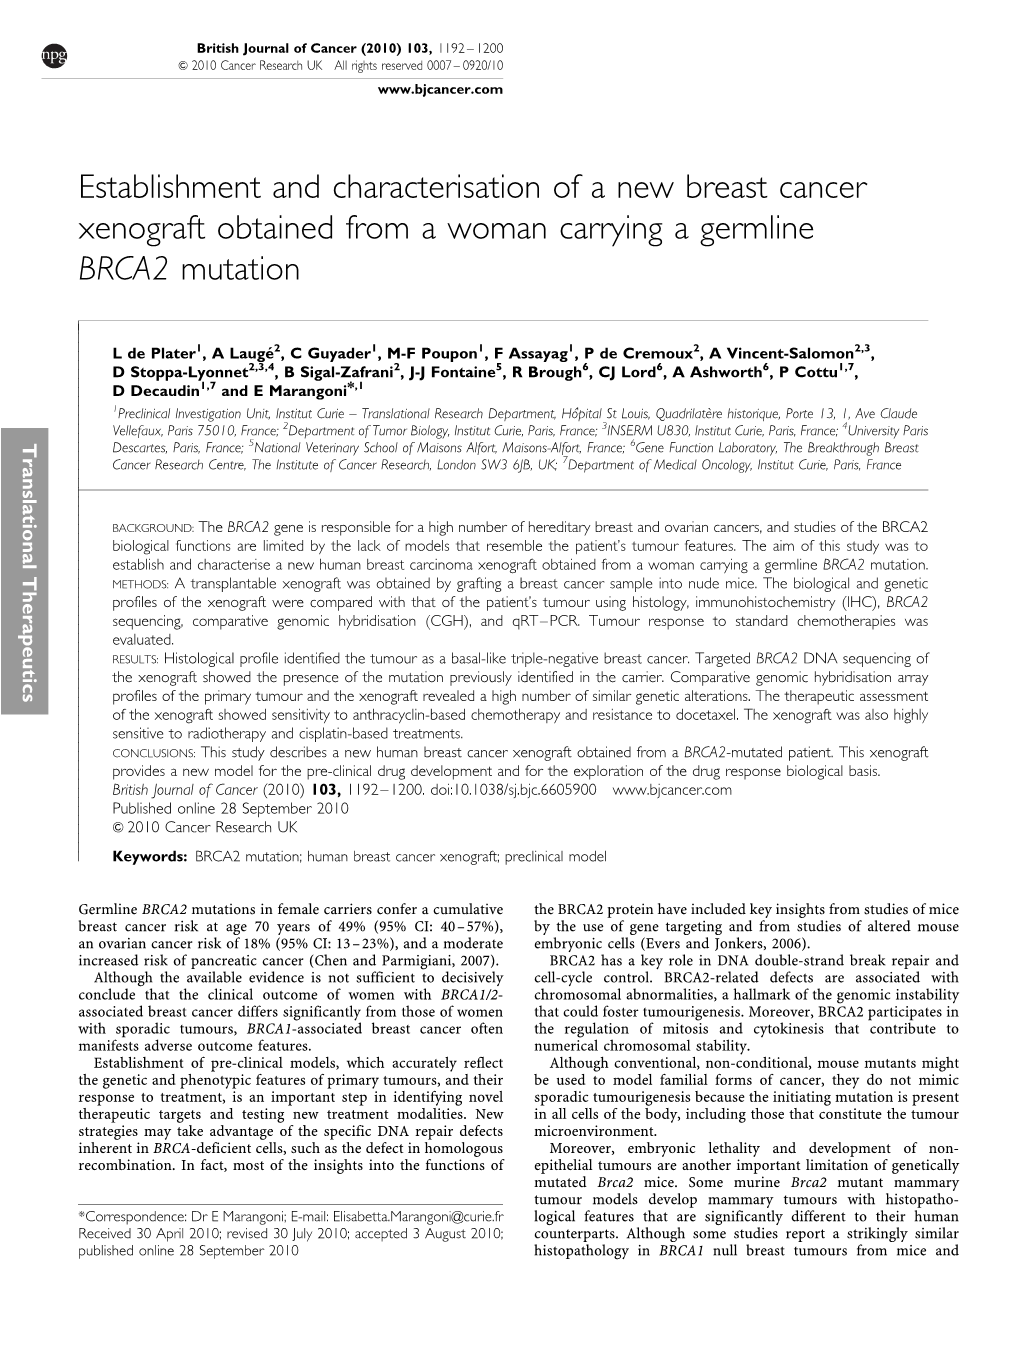 Establishment and Characterisation of a New Breast Cancer Xenograft Obtained from a Woman Carrying a Germline BRCA2 Mutation